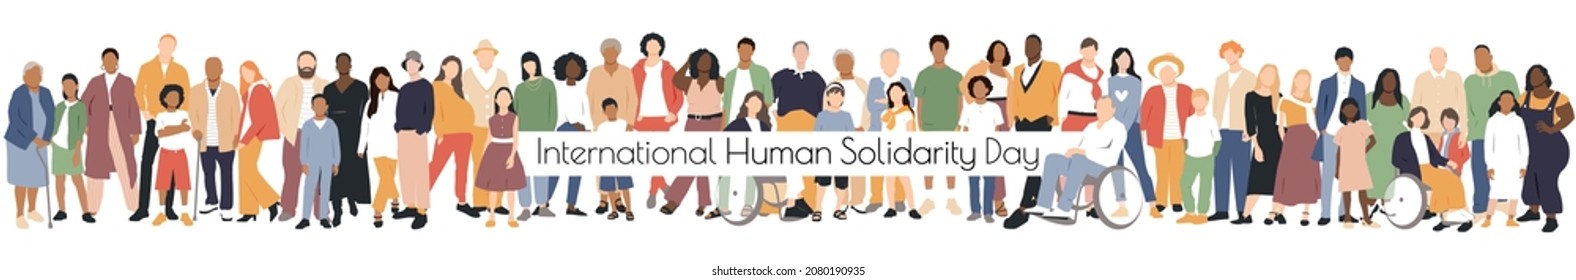 International Human Solidarity Day banner. People of different ethnicities stand side by side together. Flat vector illustration.	